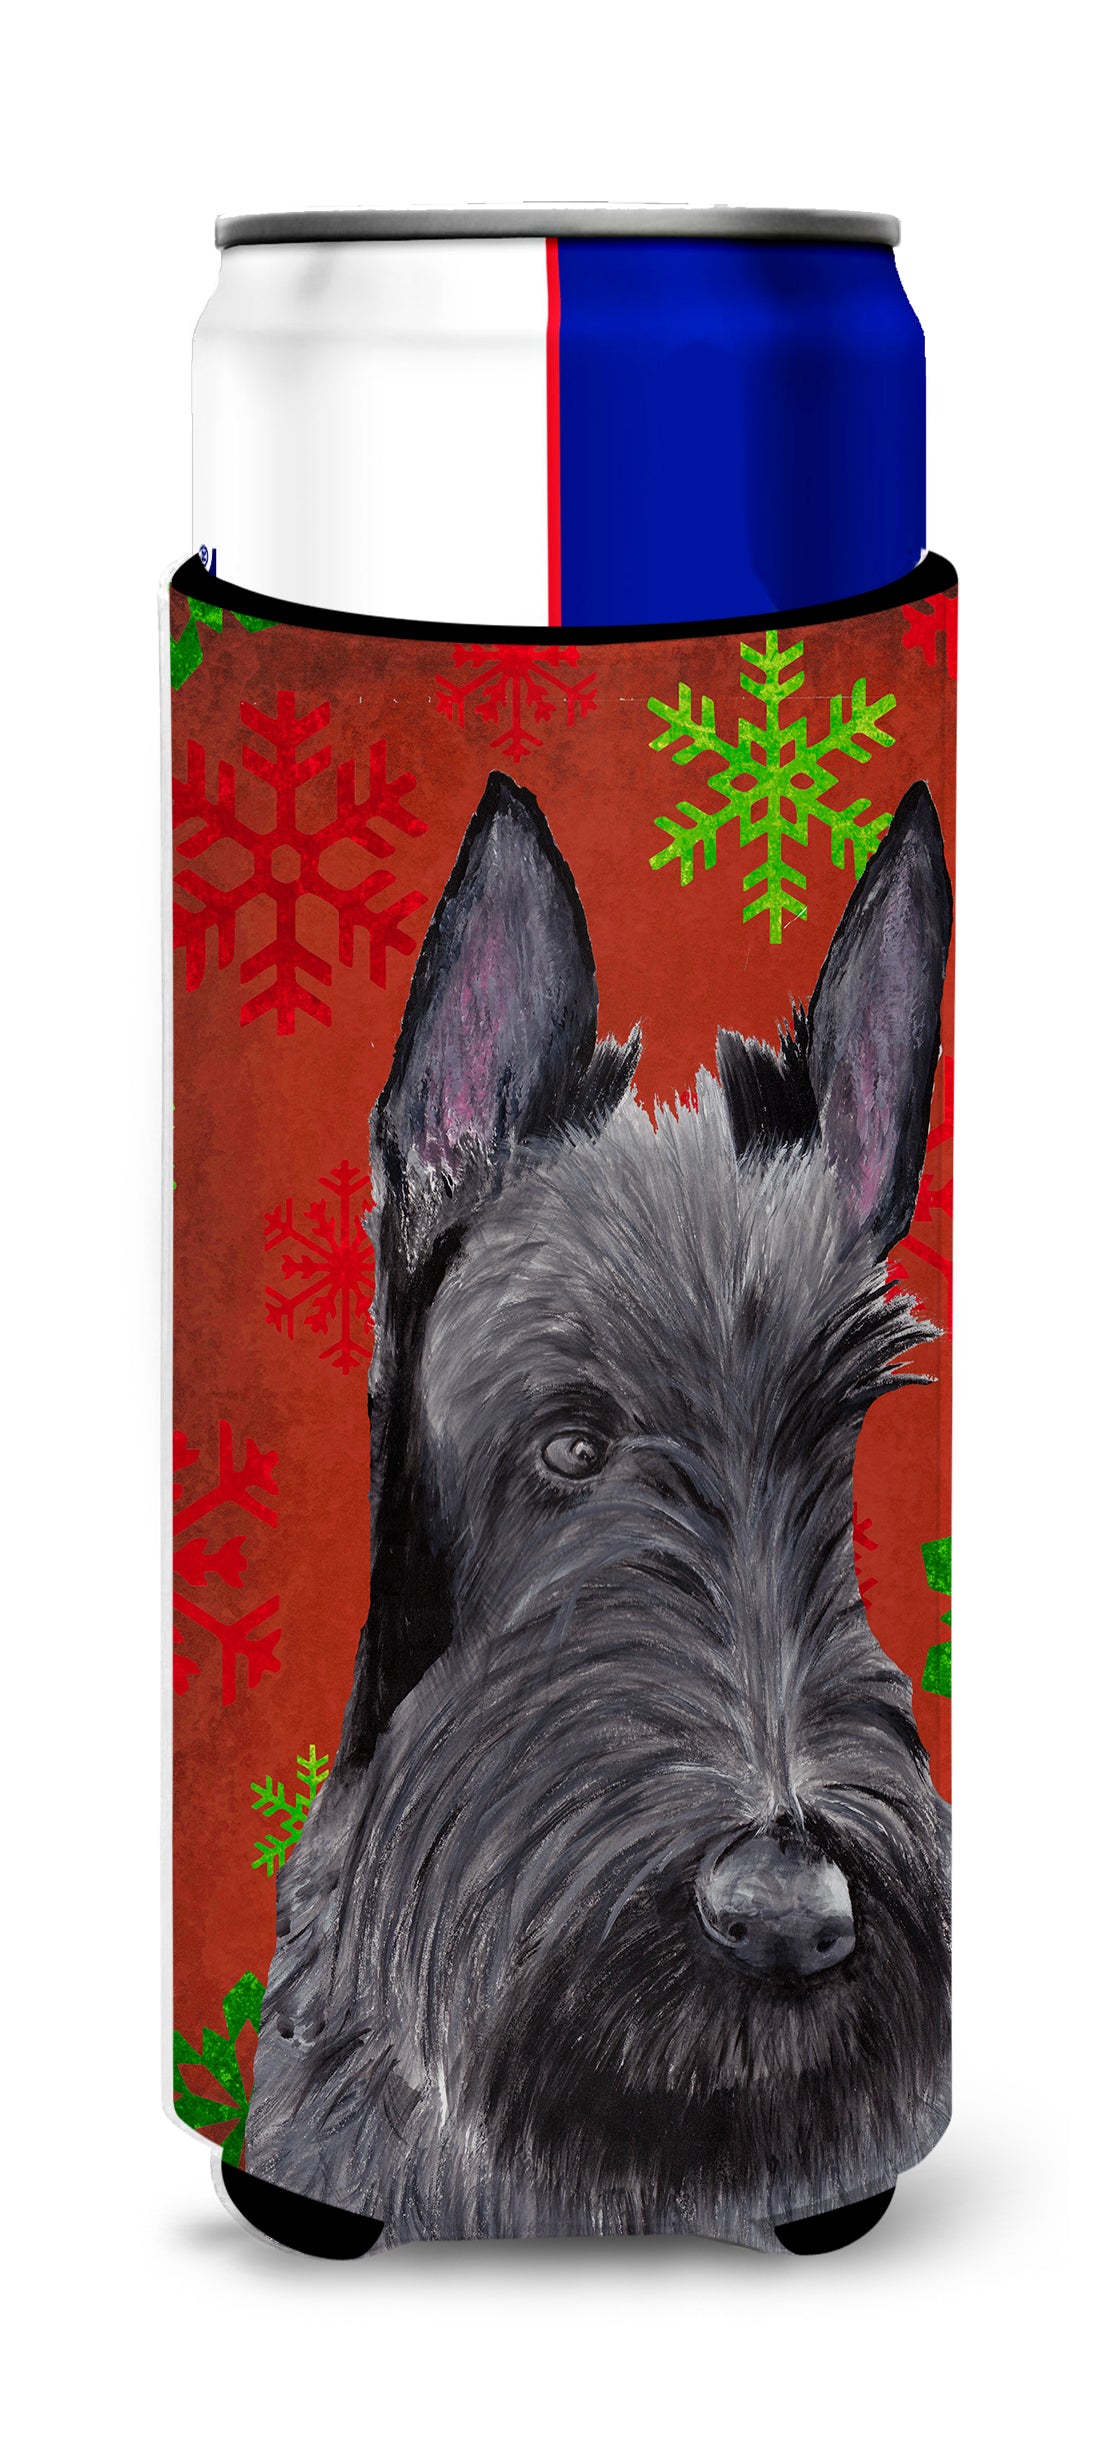 Scottish Terrier Red and Green Snowflakes Holiday Christmas Ultra Beverage Insulators for slim cans SC9426MUK